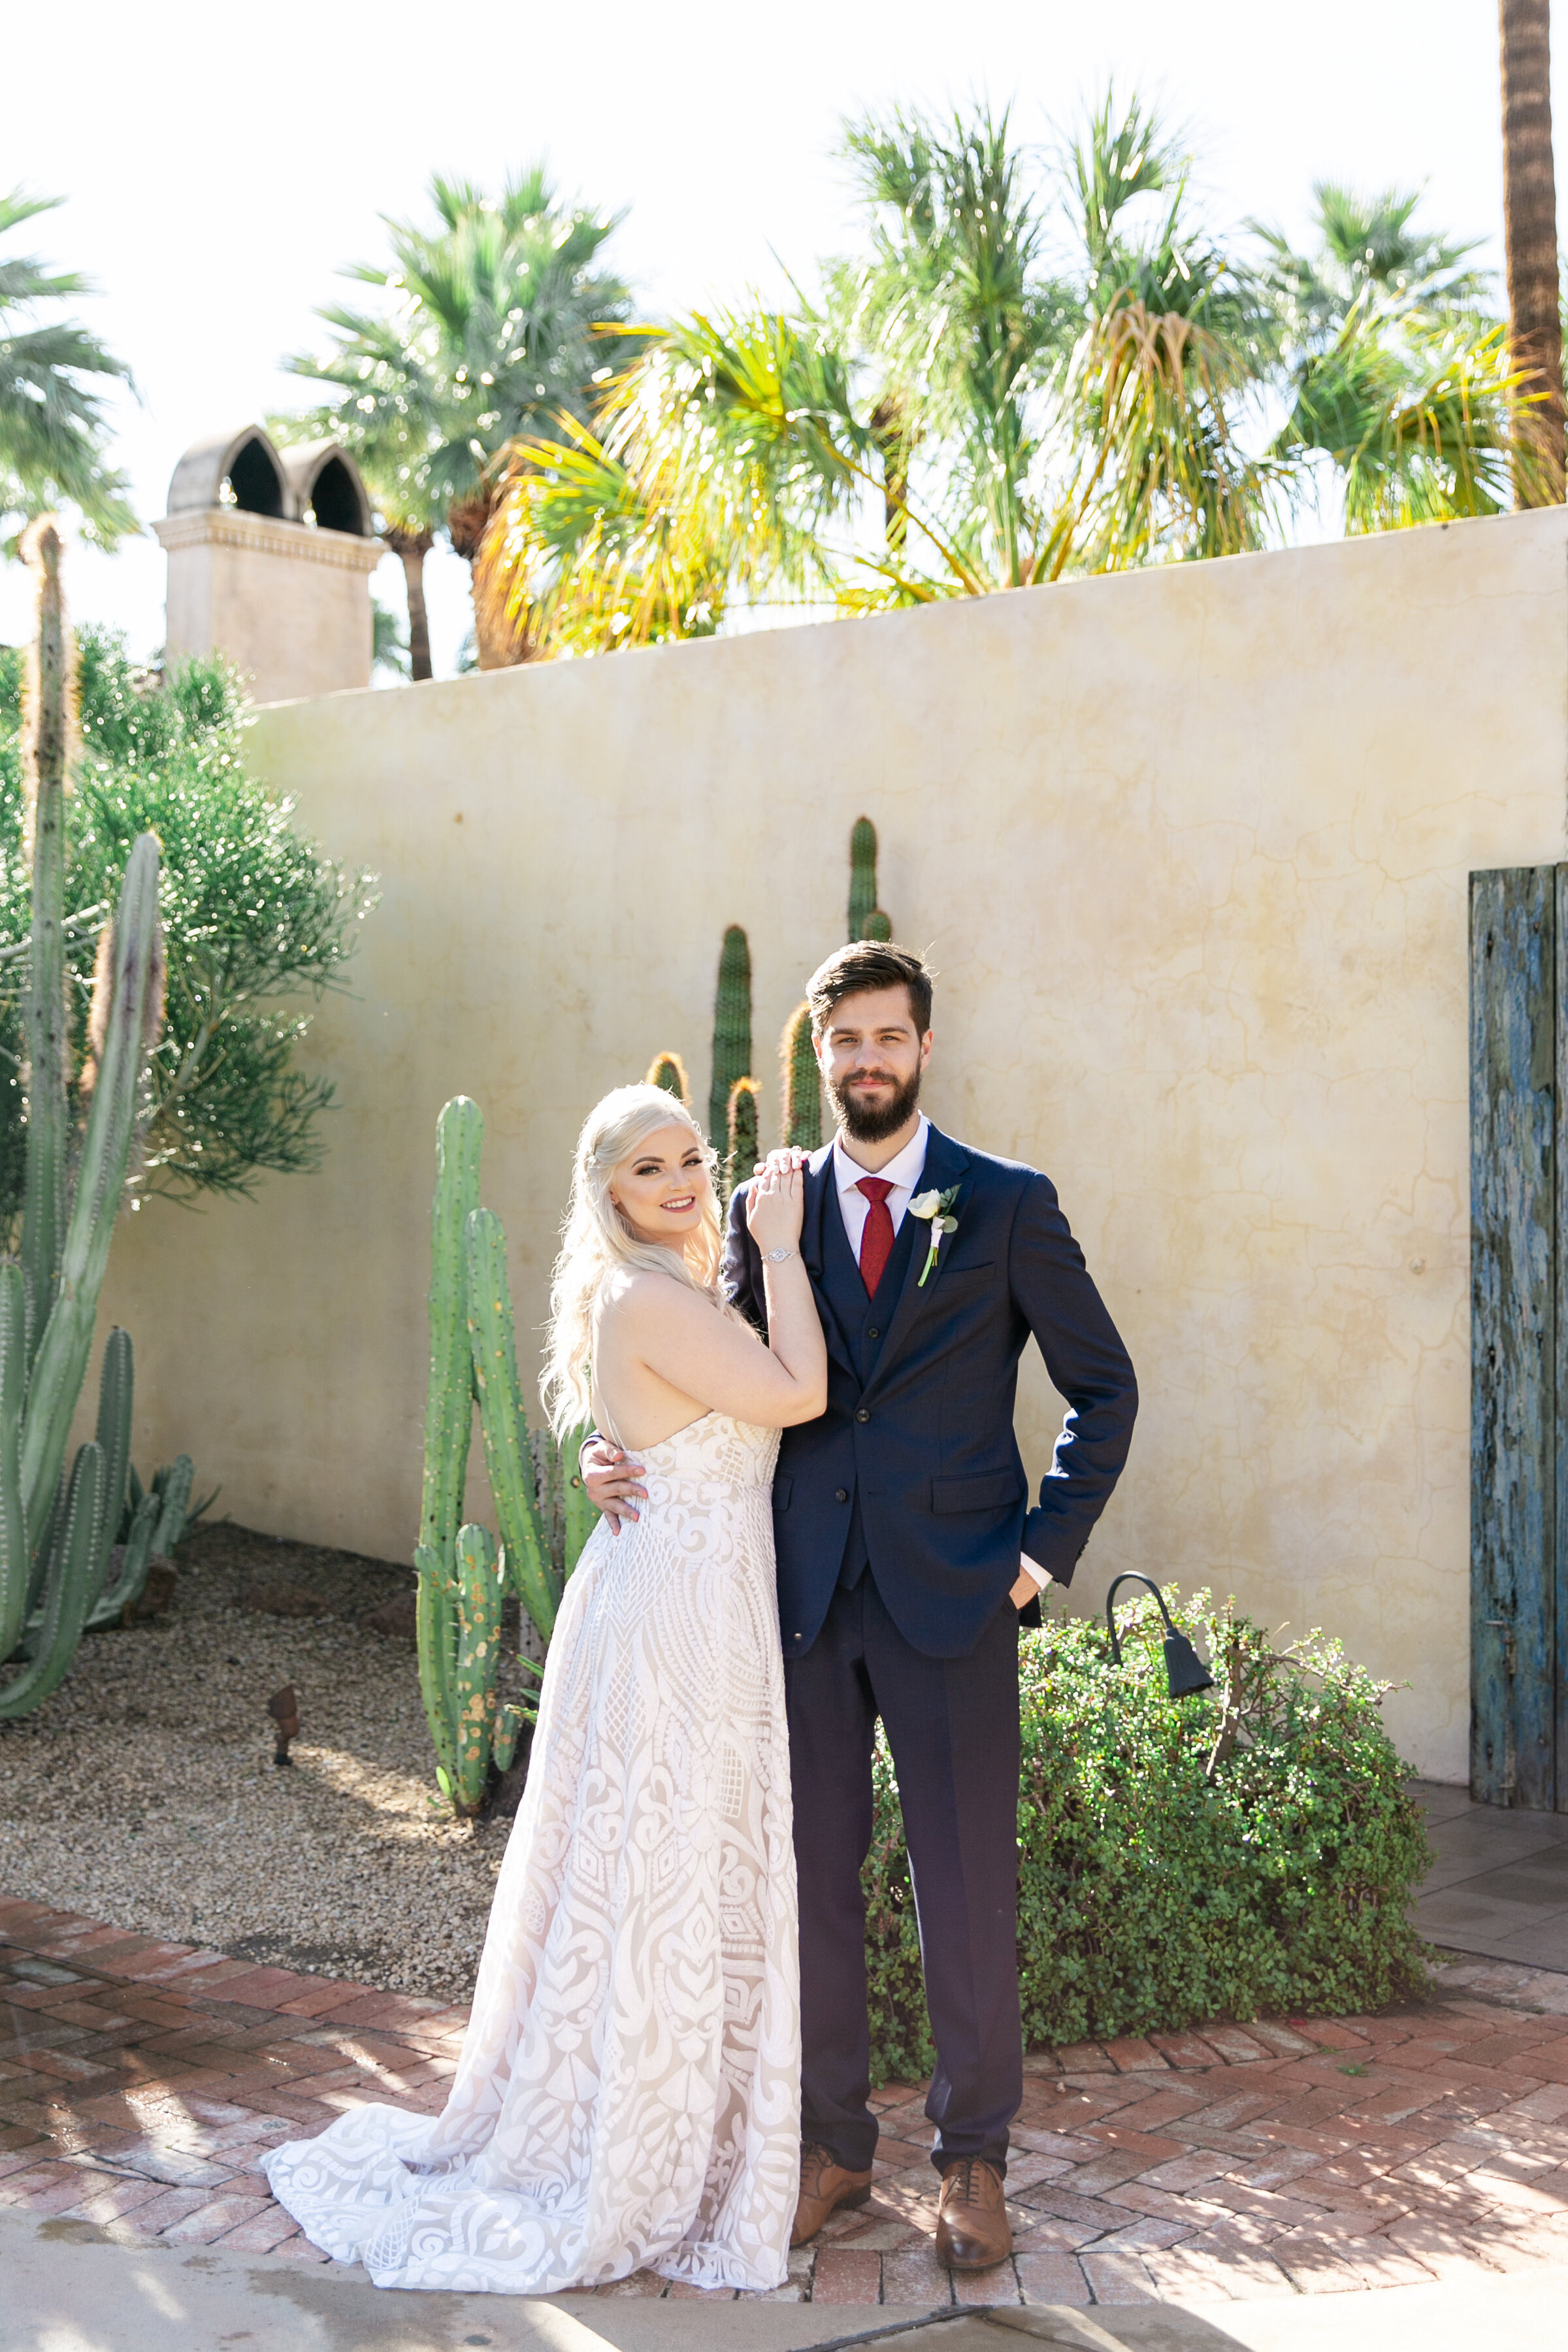 Karlie Colleen Photography - The Royal Palms Wedding - Some Like It Classic - Alex & Sam-144